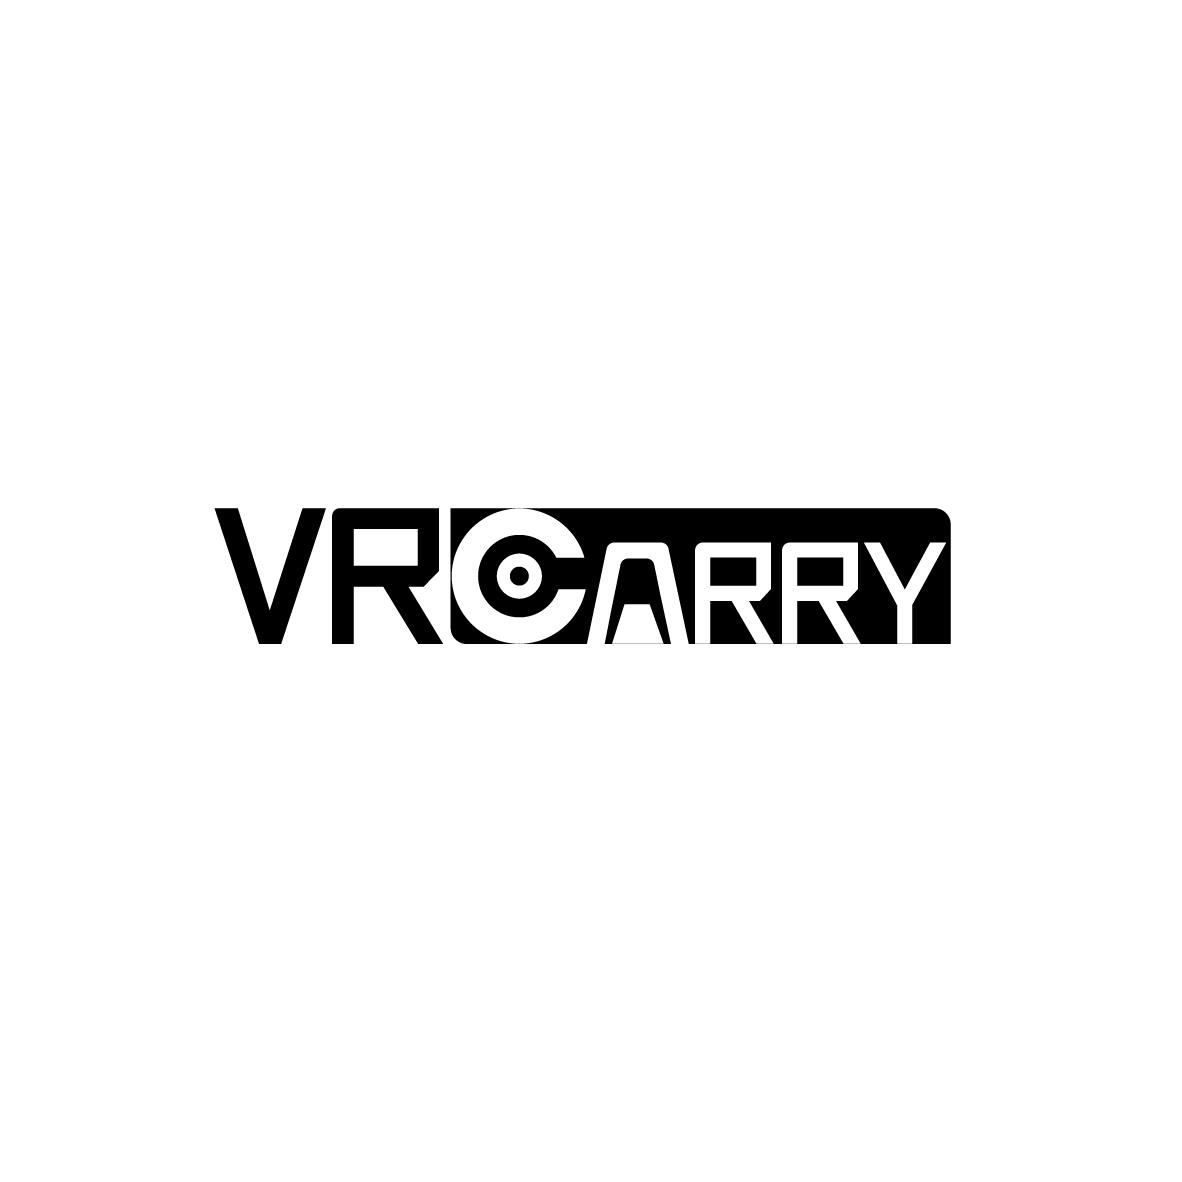 VRCARRY